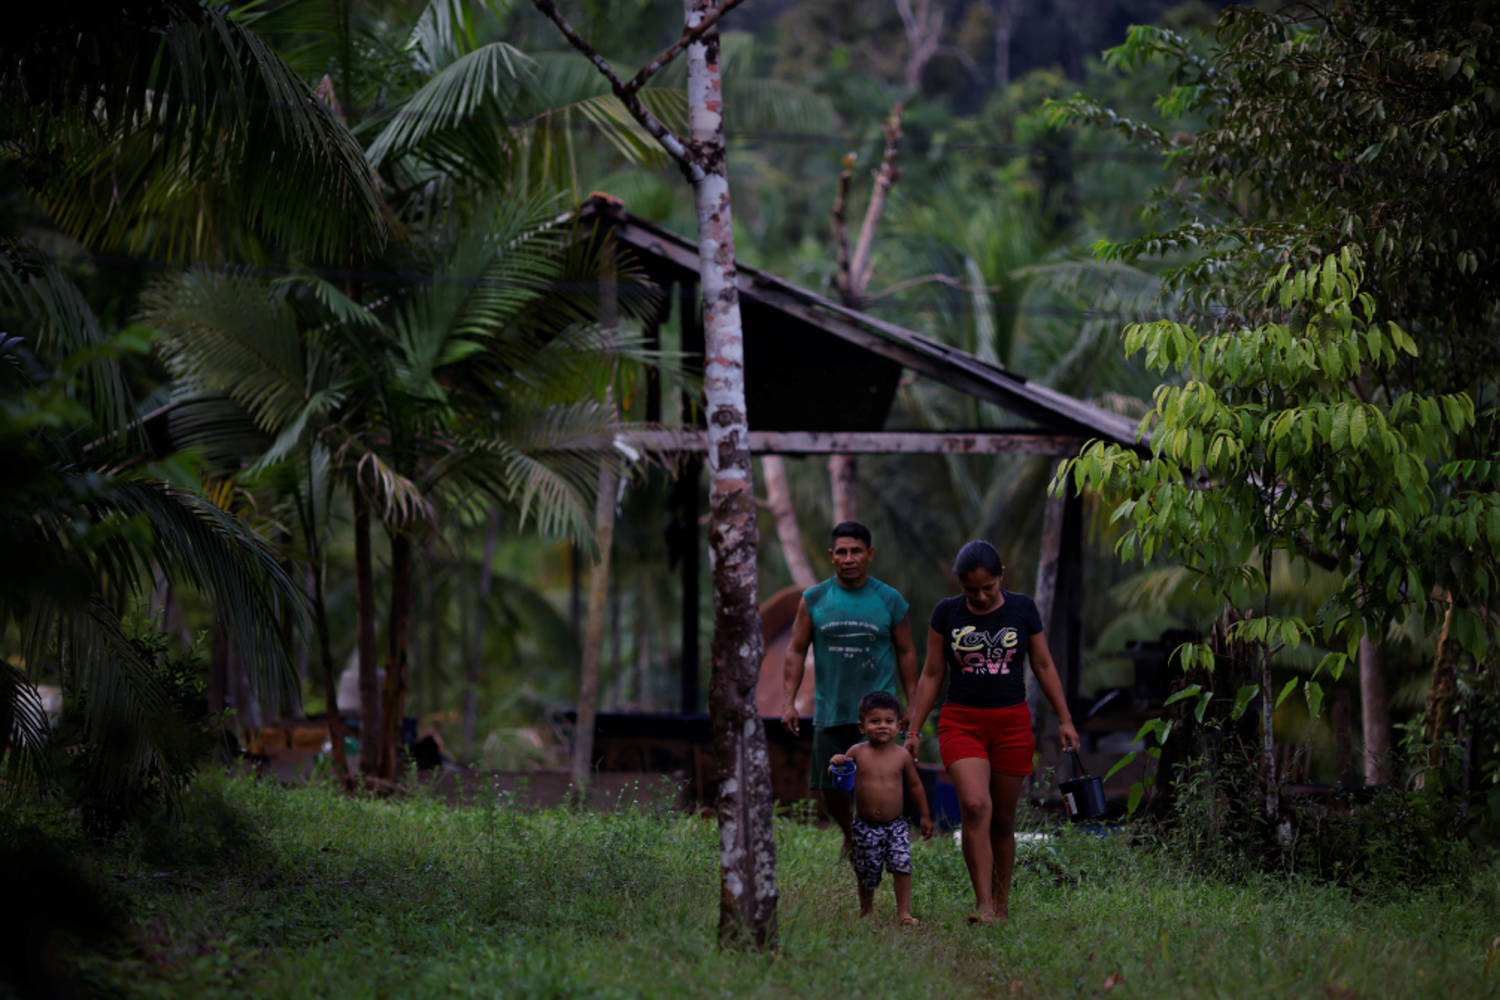 Eduardo Dos Santos, Atiele Santos And A Child Of The Karipuna Indigenous People Walk At The Ahuma Village, Near The Mouth Of The Amazon In Oiapoque